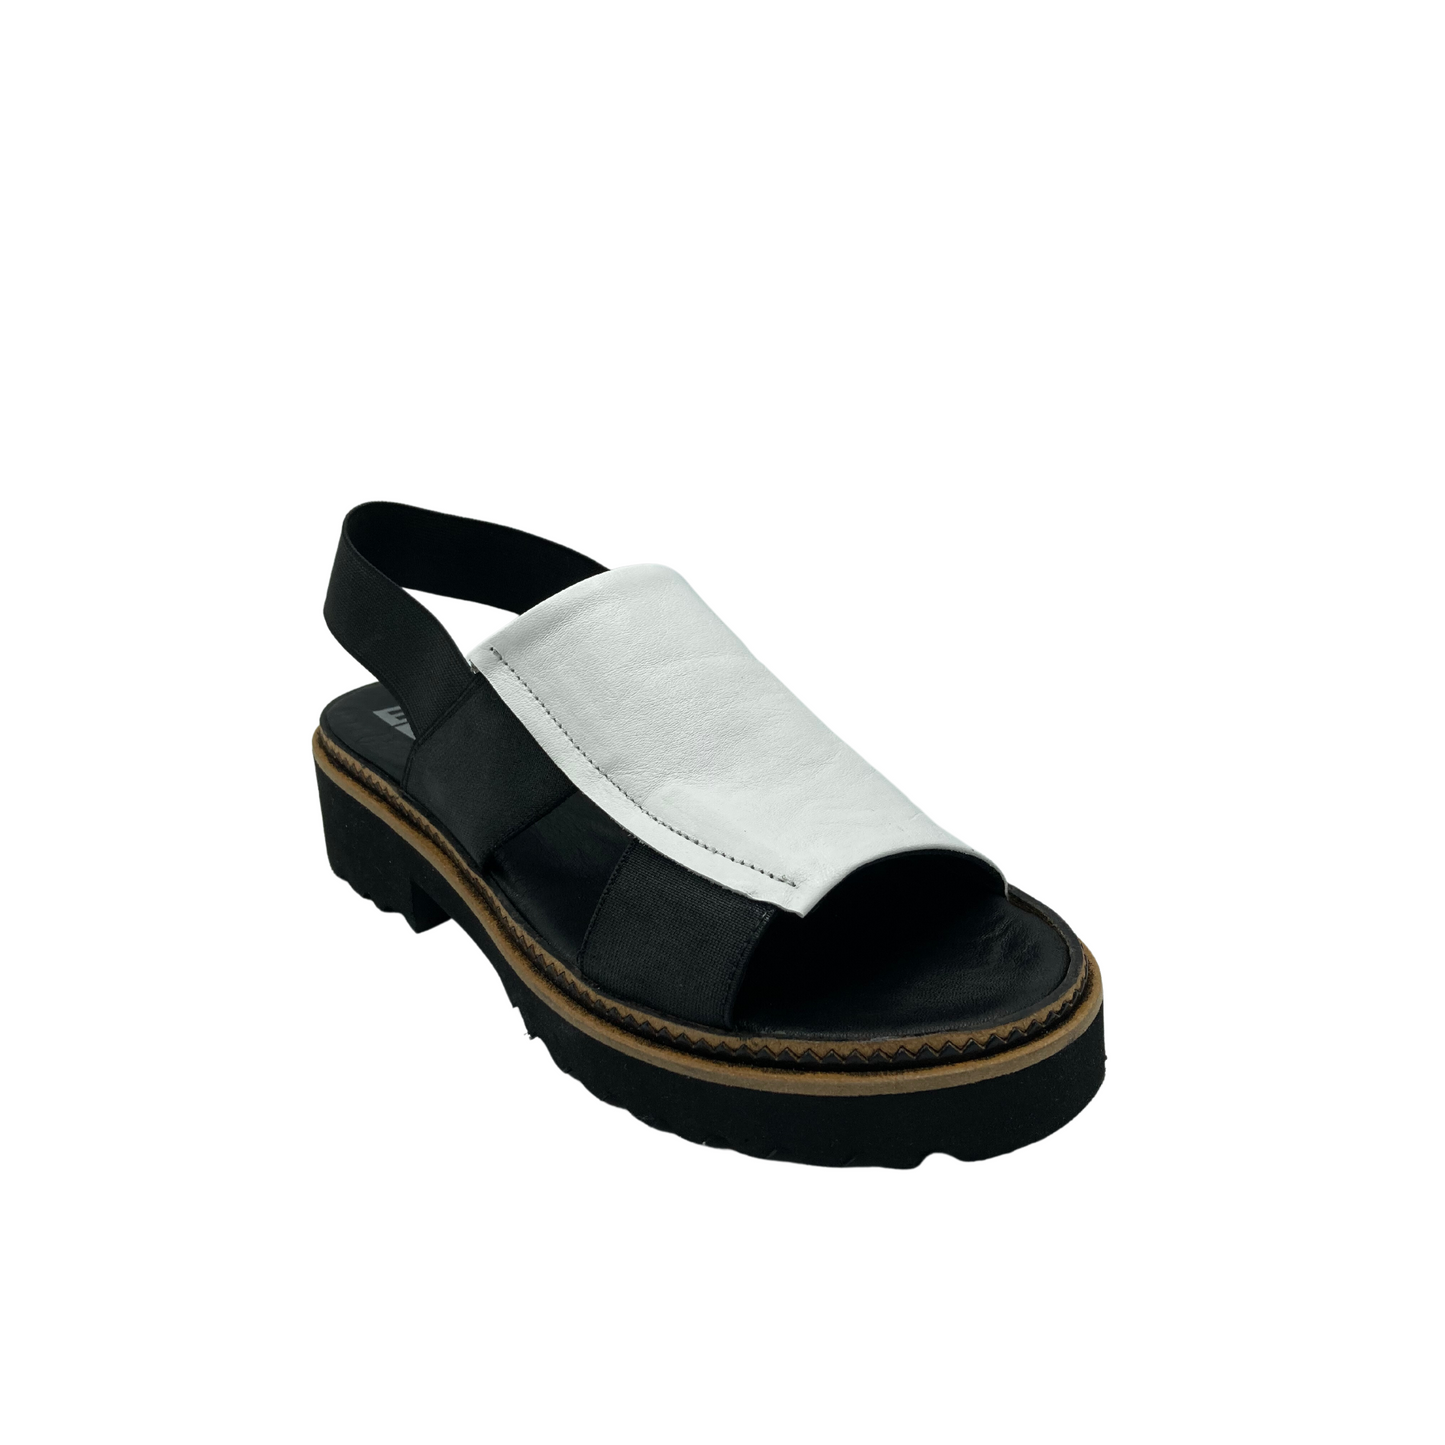 Angled front view of Bueno Amy in black/white combo.  Slip on style with elastic back strap.  White from inside to just past middle of top of foot.  Black down outside.  